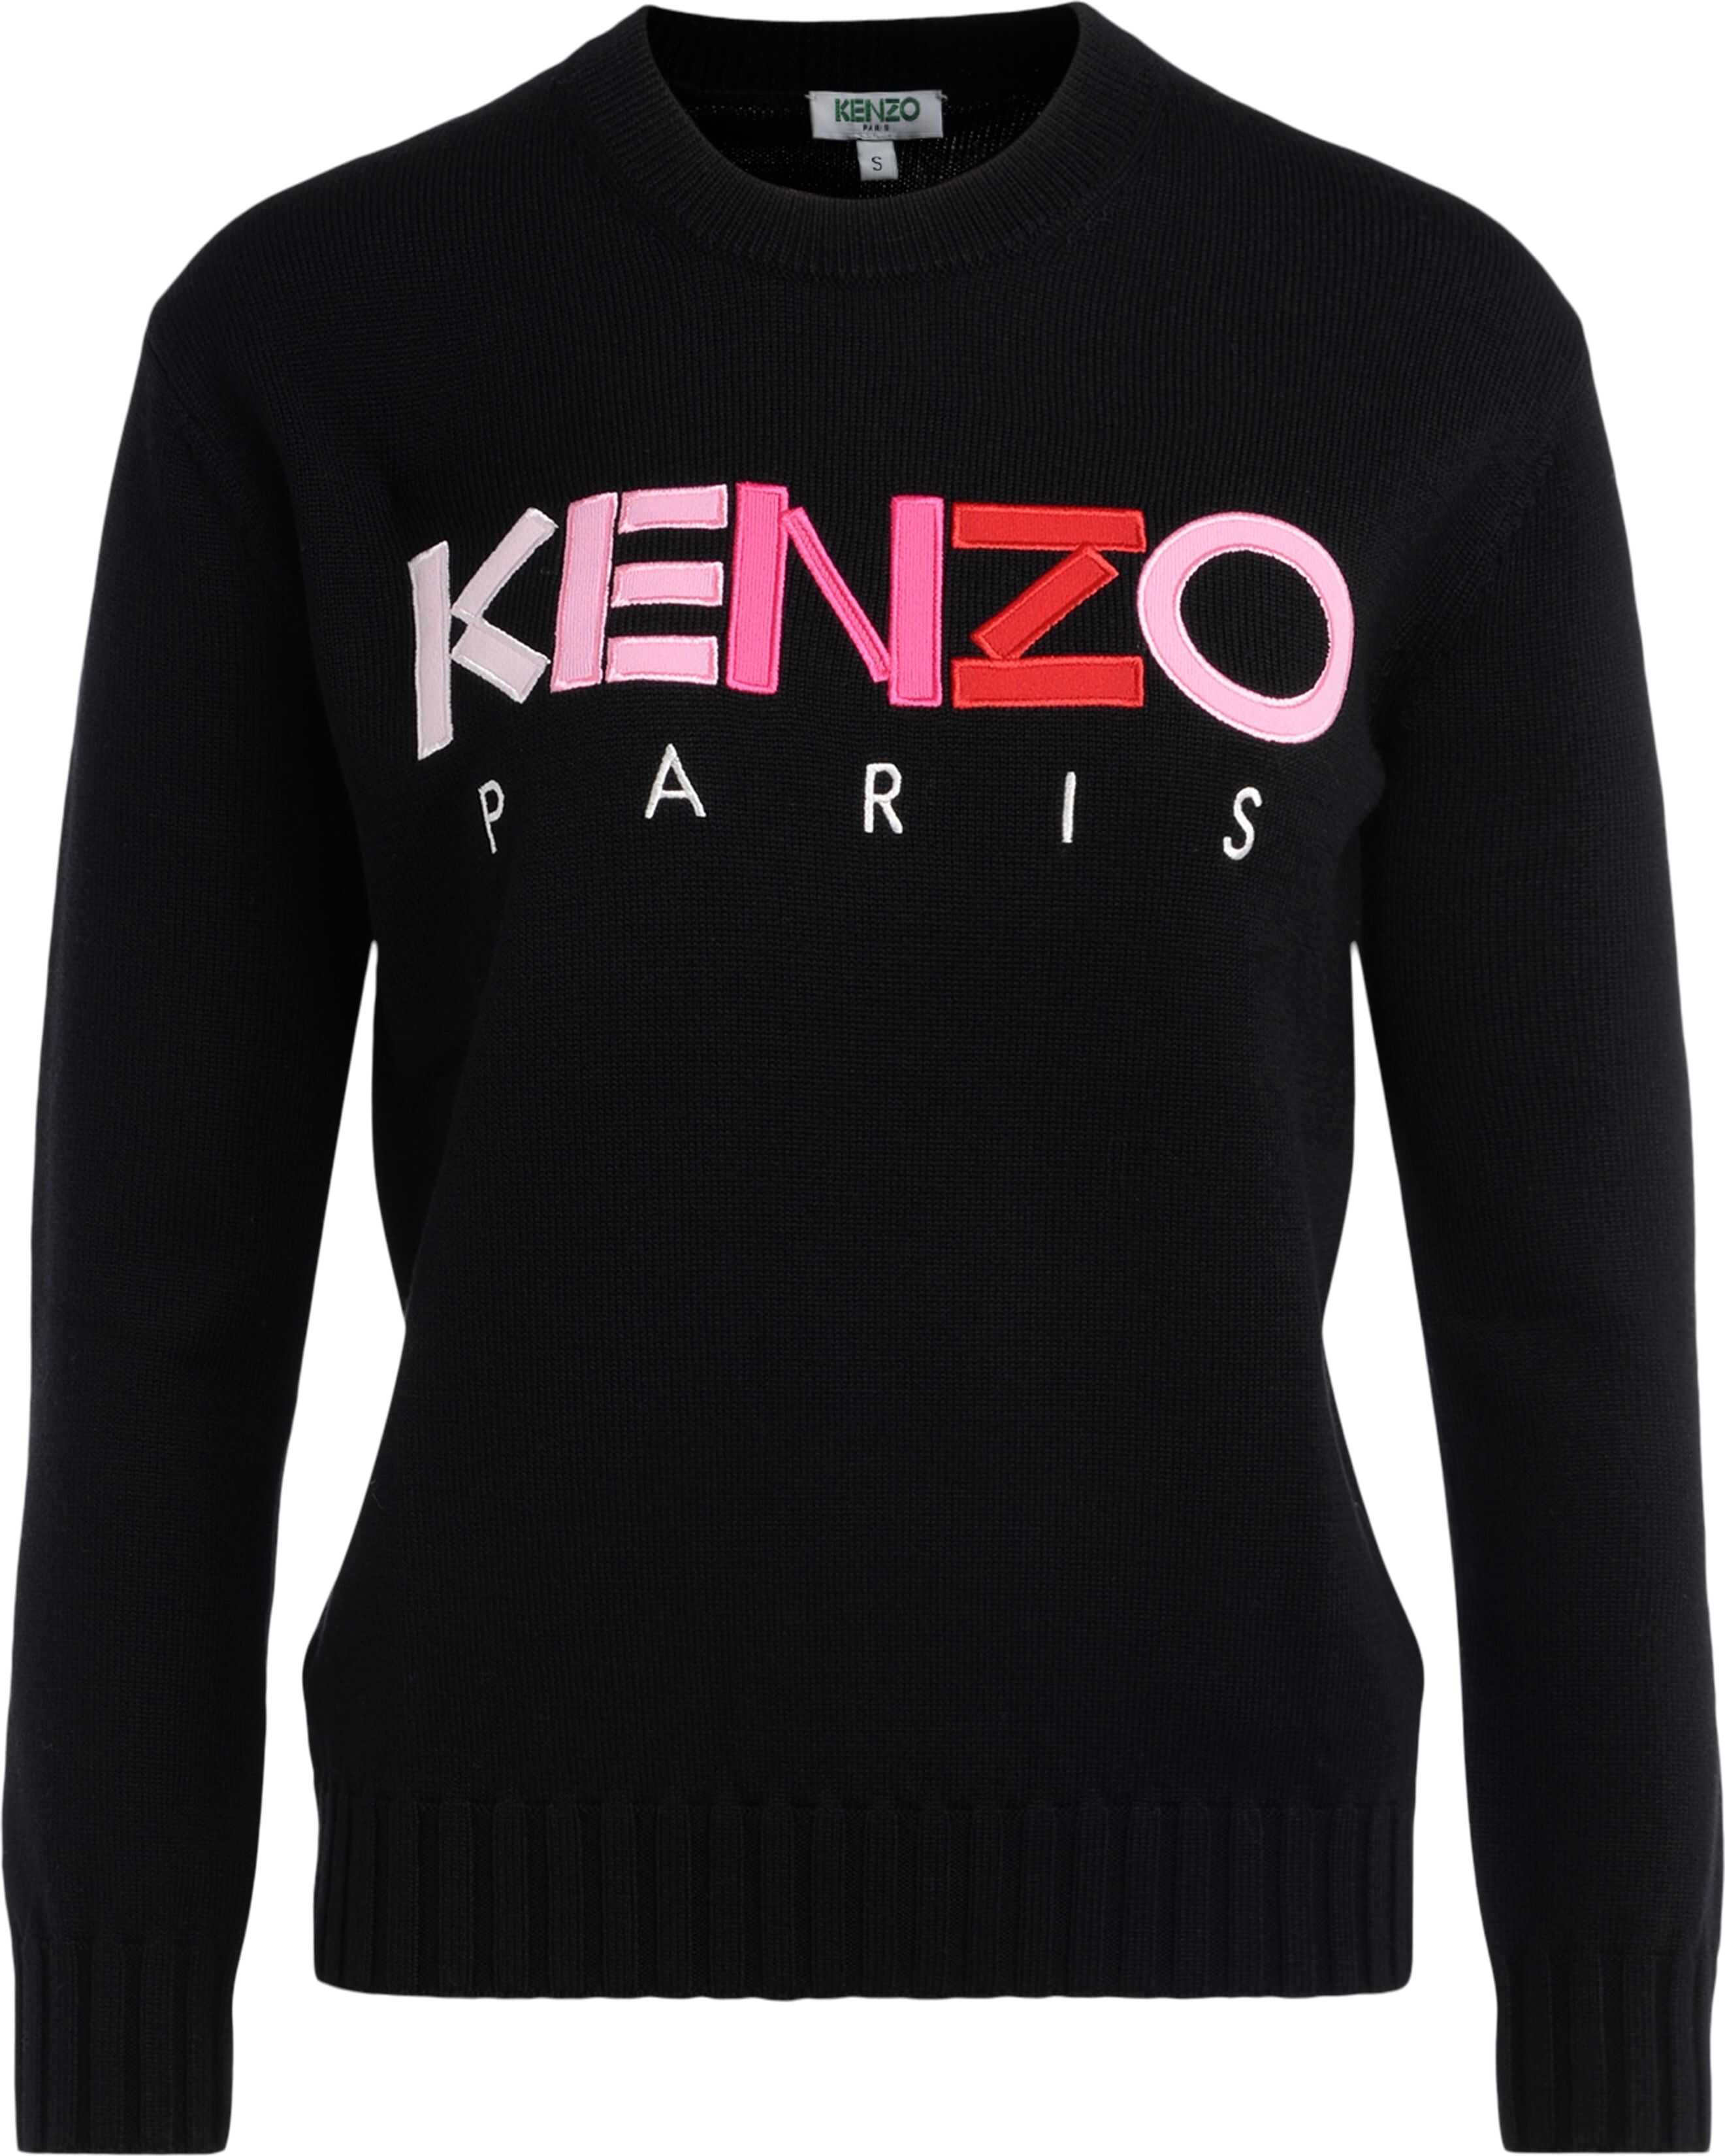 Kenzo Shirt In Black Fabric With Multicolored Front Logo Black